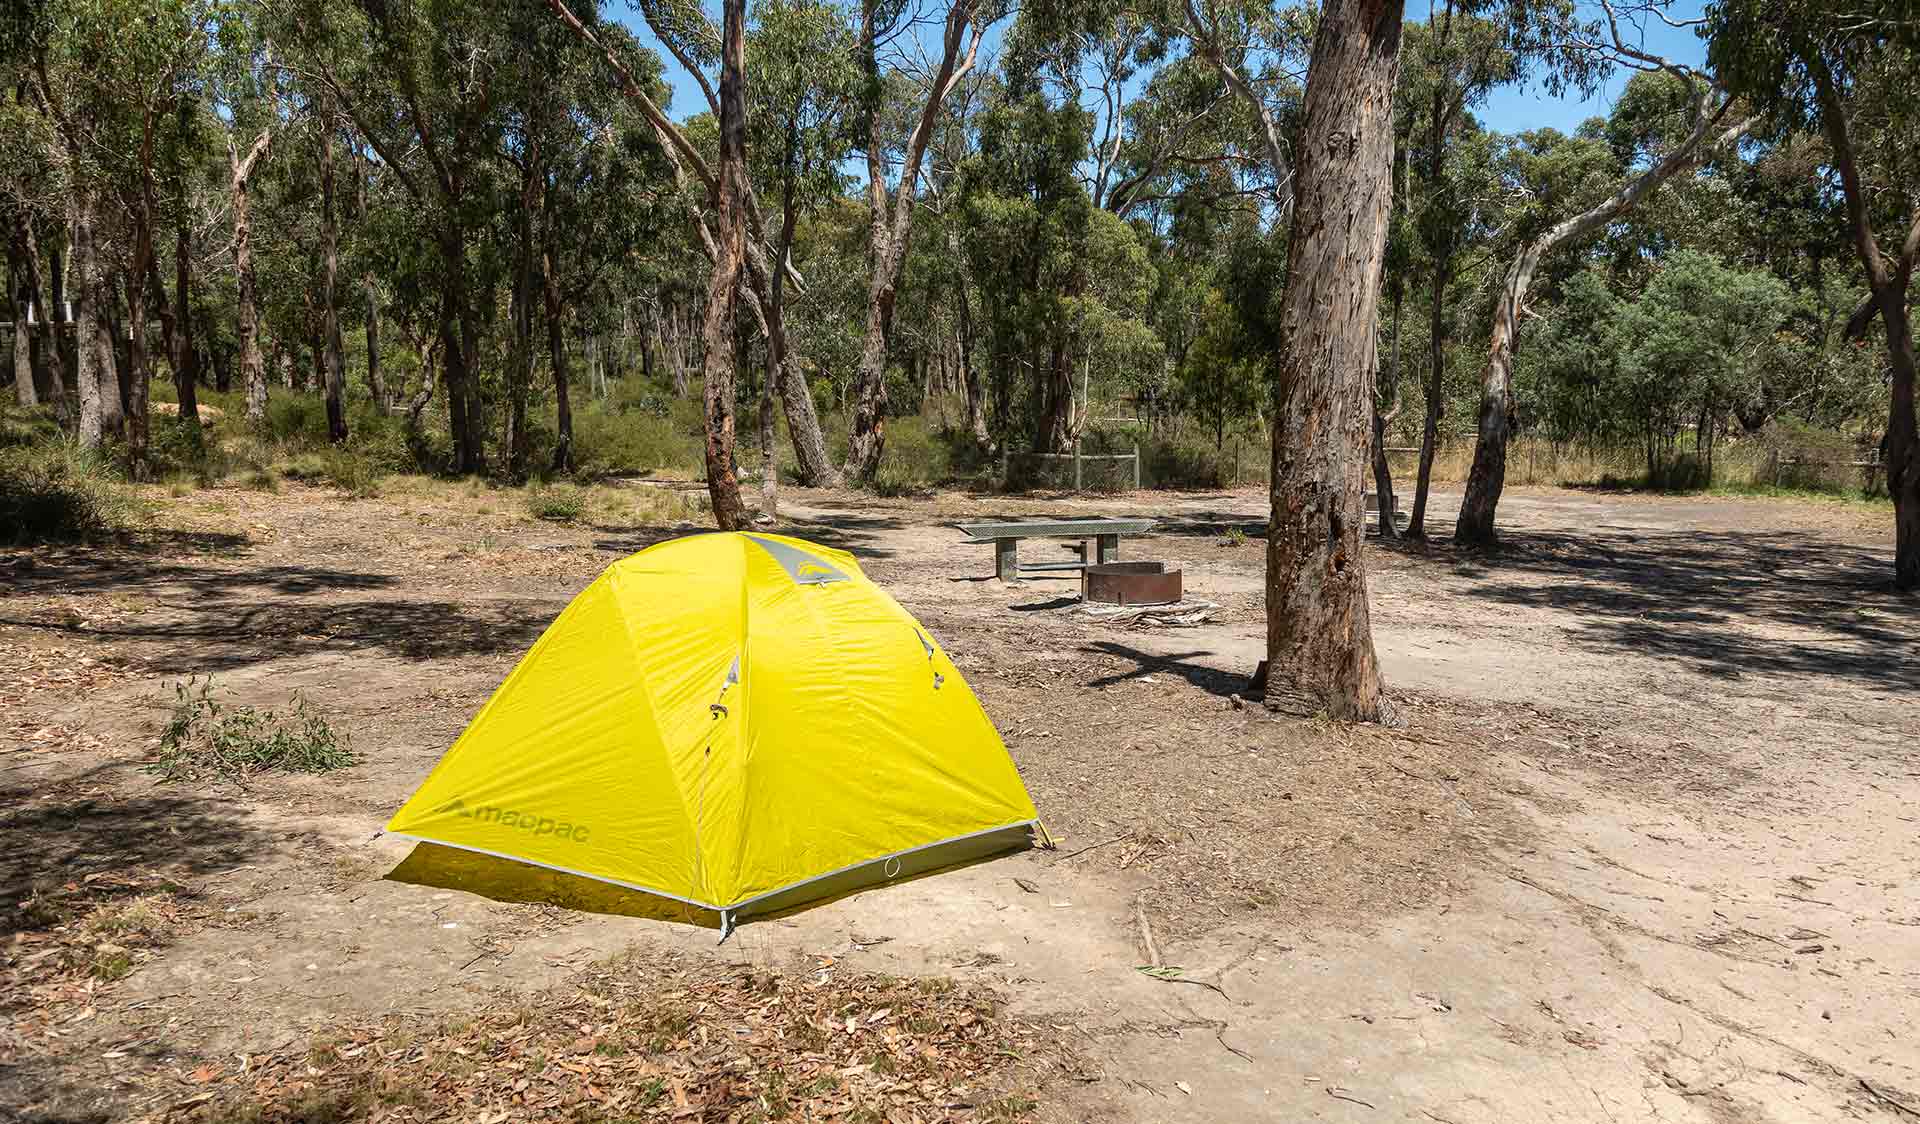 A yellow tent and campfire at Boar Gully Campground at Brisbane Ranges National Park